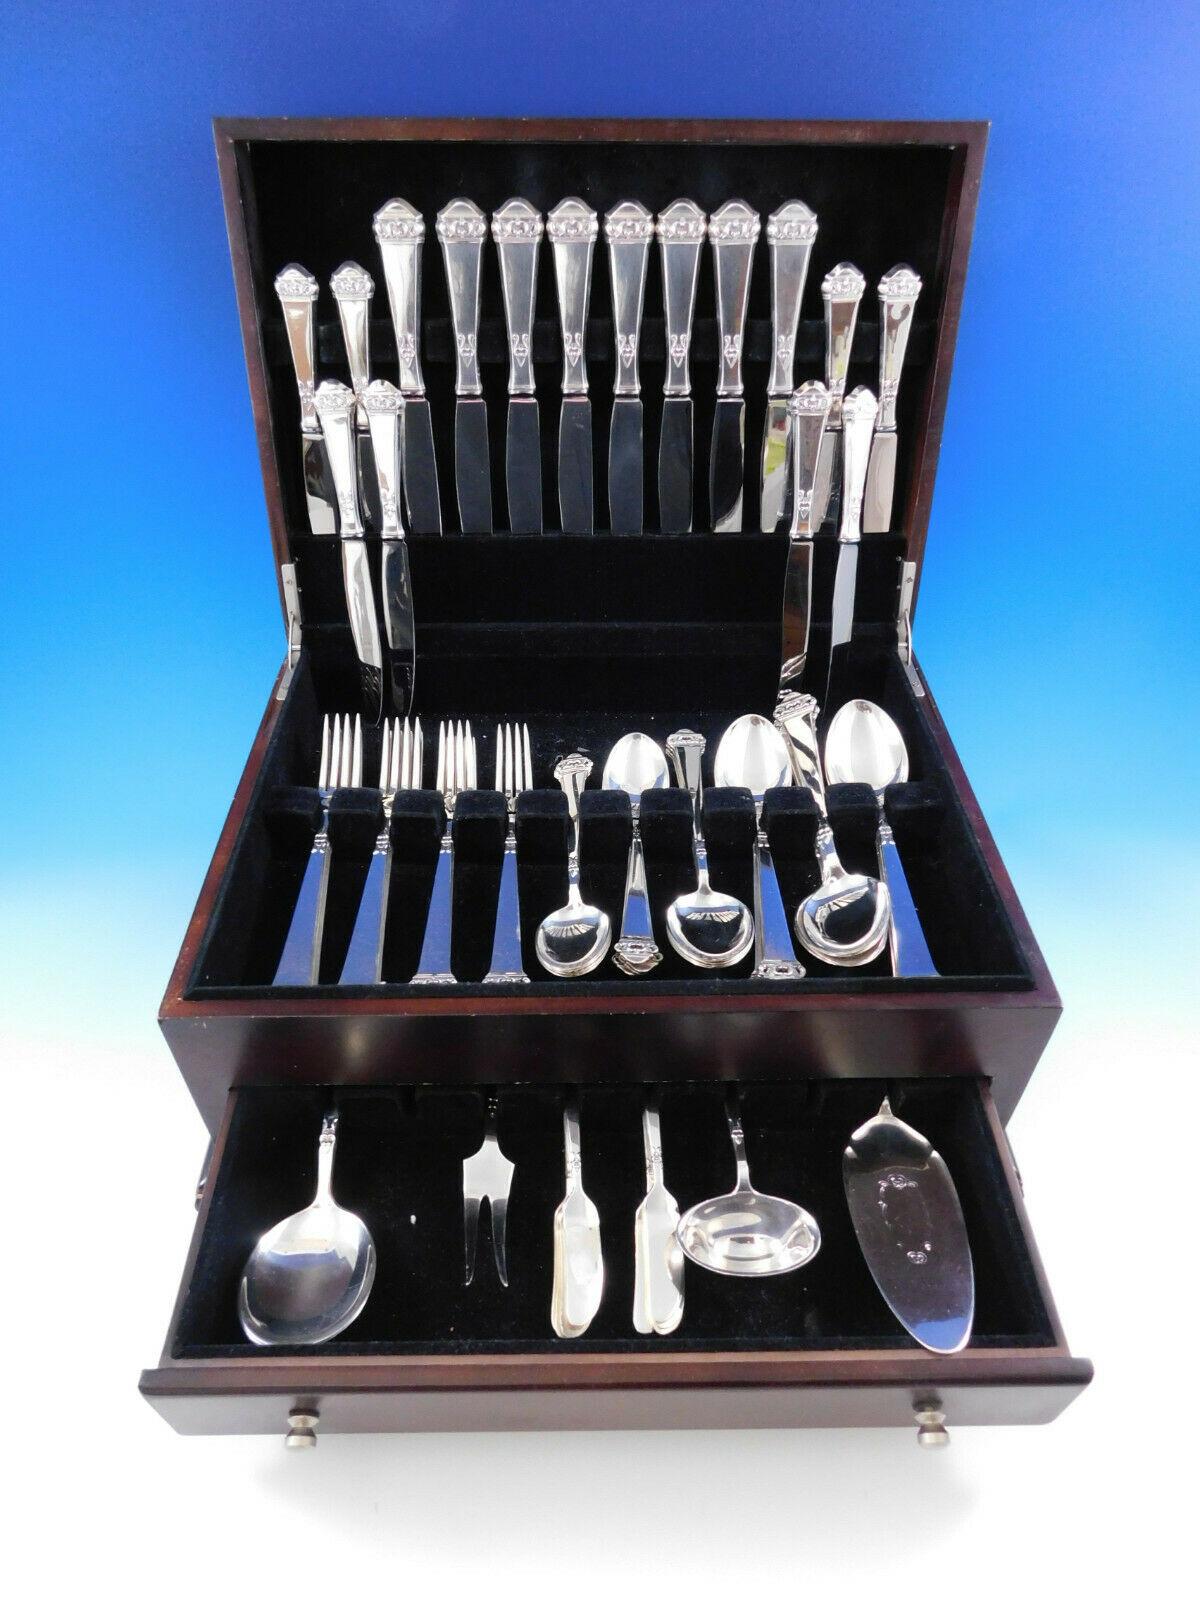 Superb Saga by Mylius Brodrene 830 silver Norwegian flatware set, 69 pieces. The company began in 1932 in Krager, in the south of Norway and closed its doors in 2008. This pattern has a pierced finial on a plain squared handle. This set includes:

8